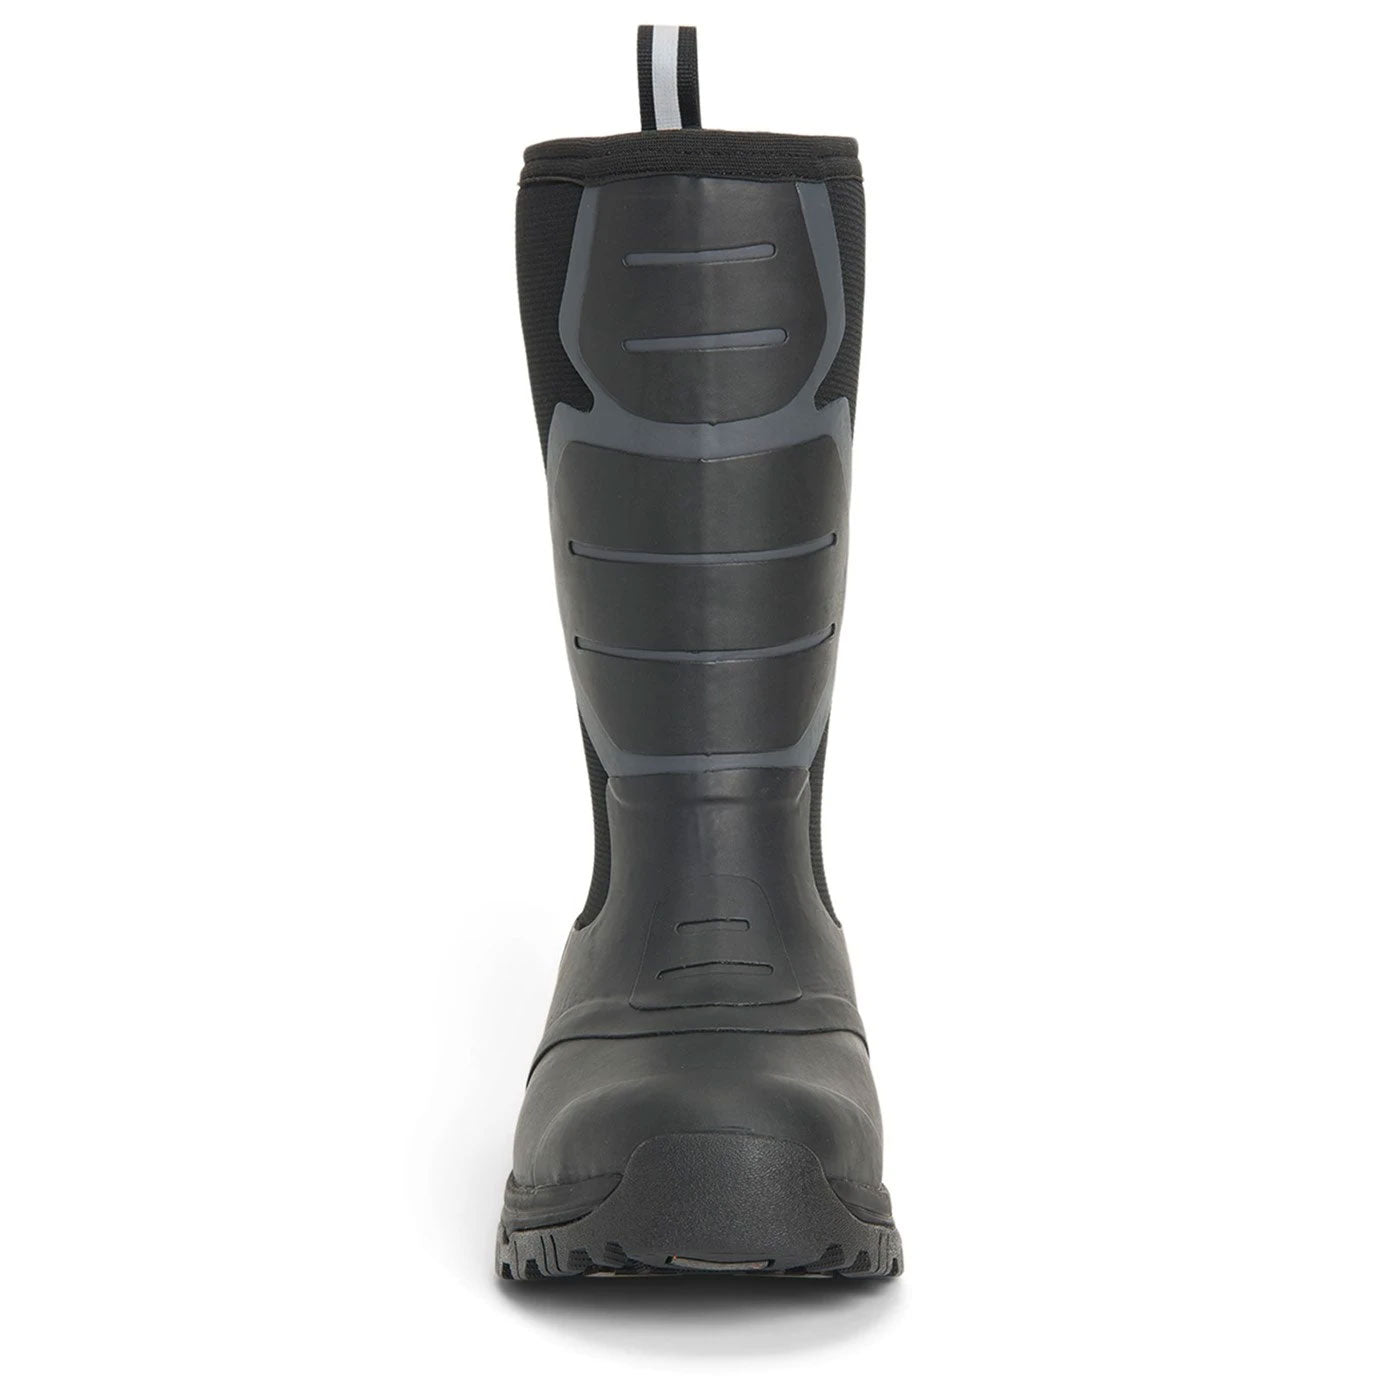 Front panels Apex Pro AG All Terrain Short Boots by The Original Muck Boot Company 